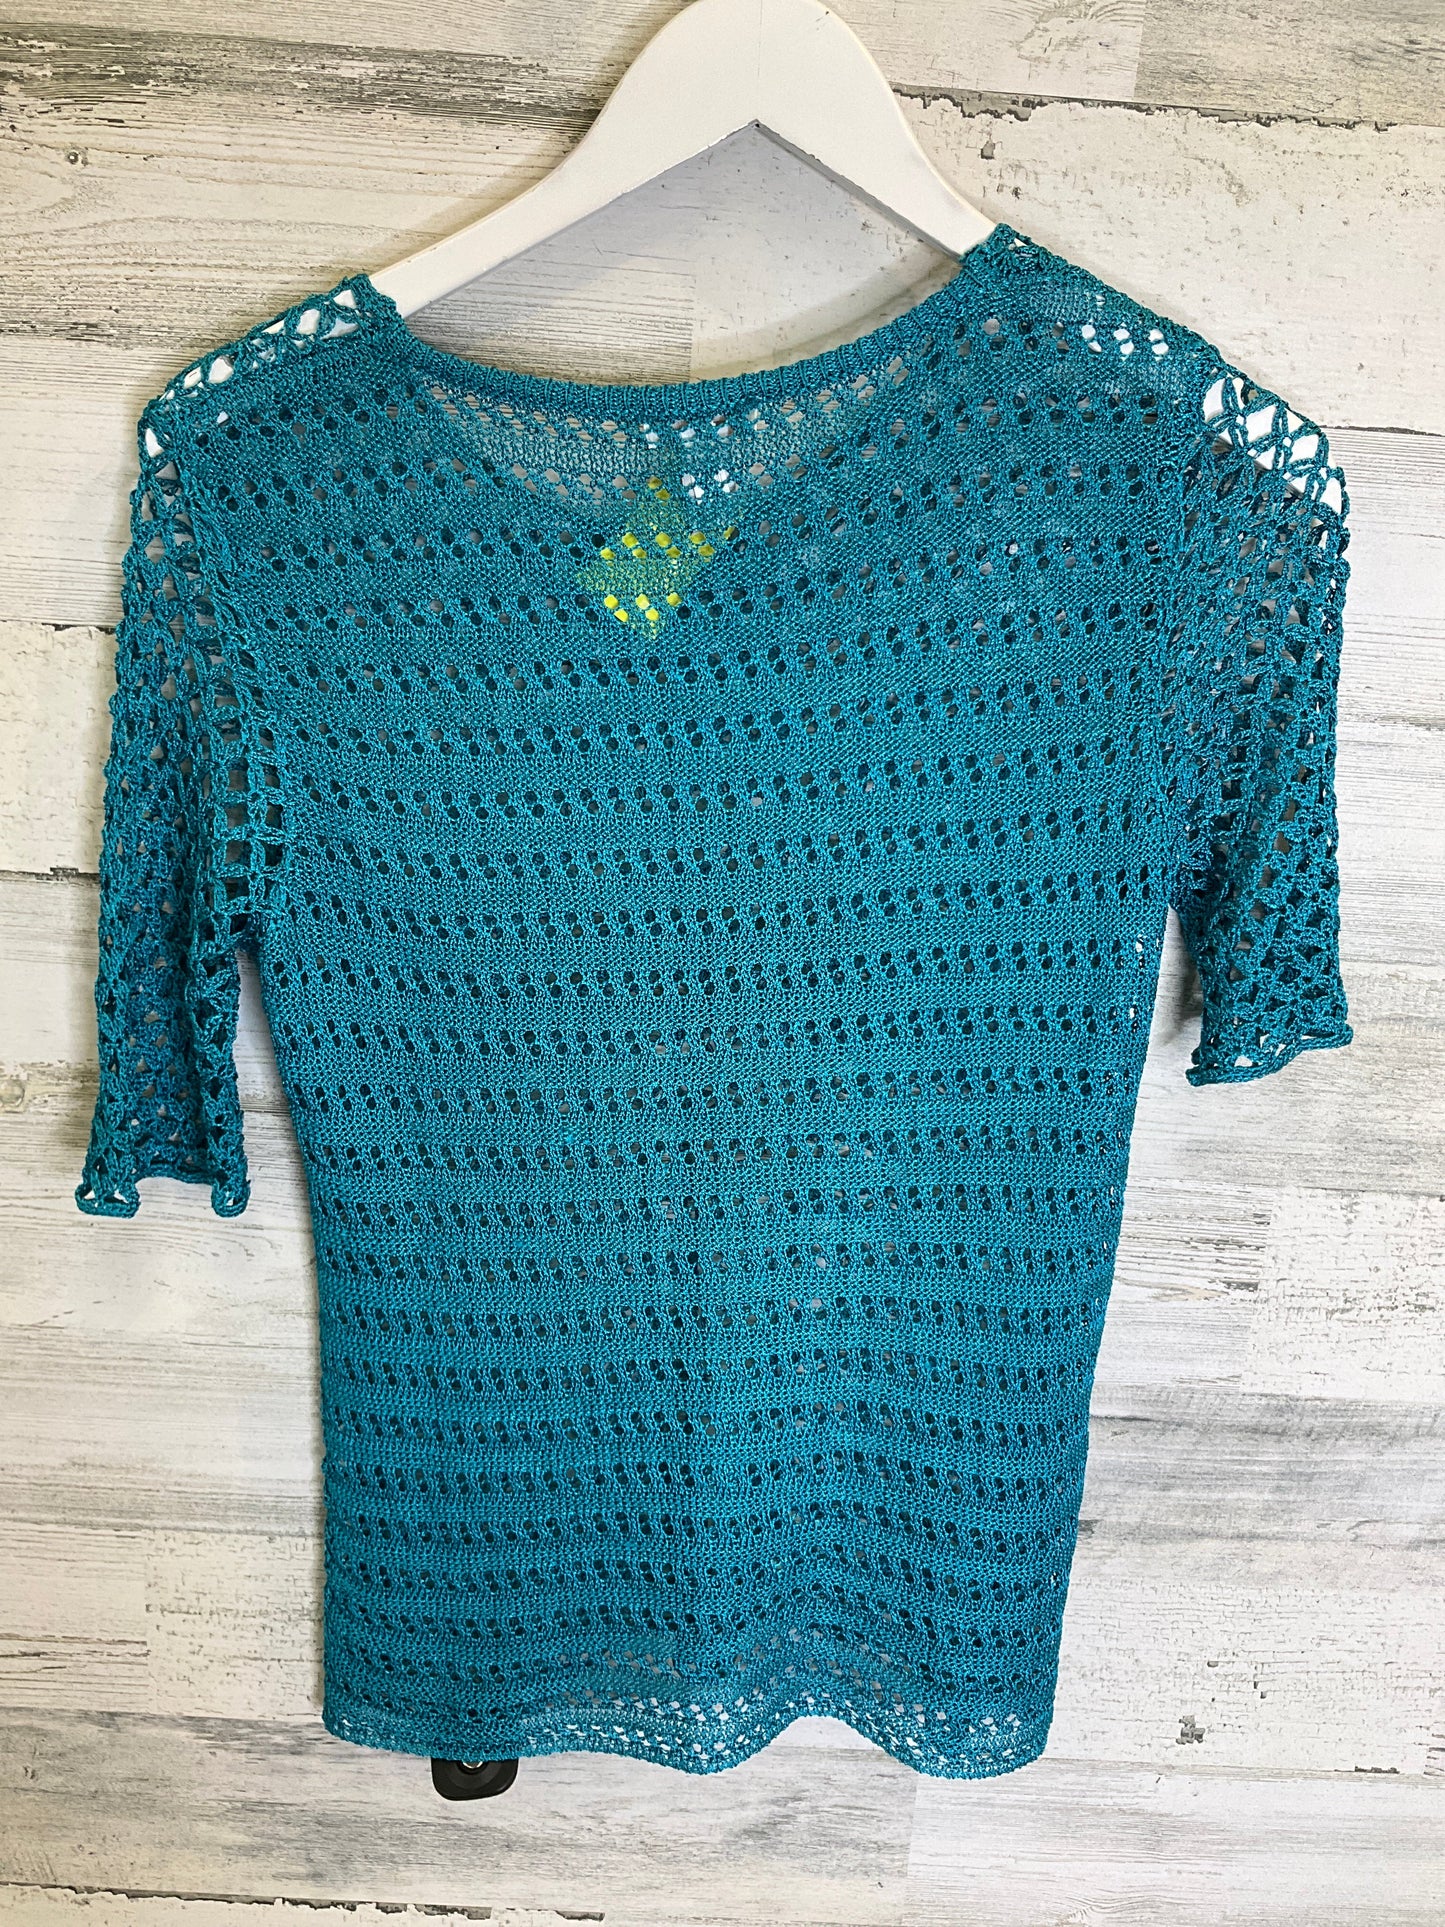 Blue Top Short Sleeve Chicos, Size S